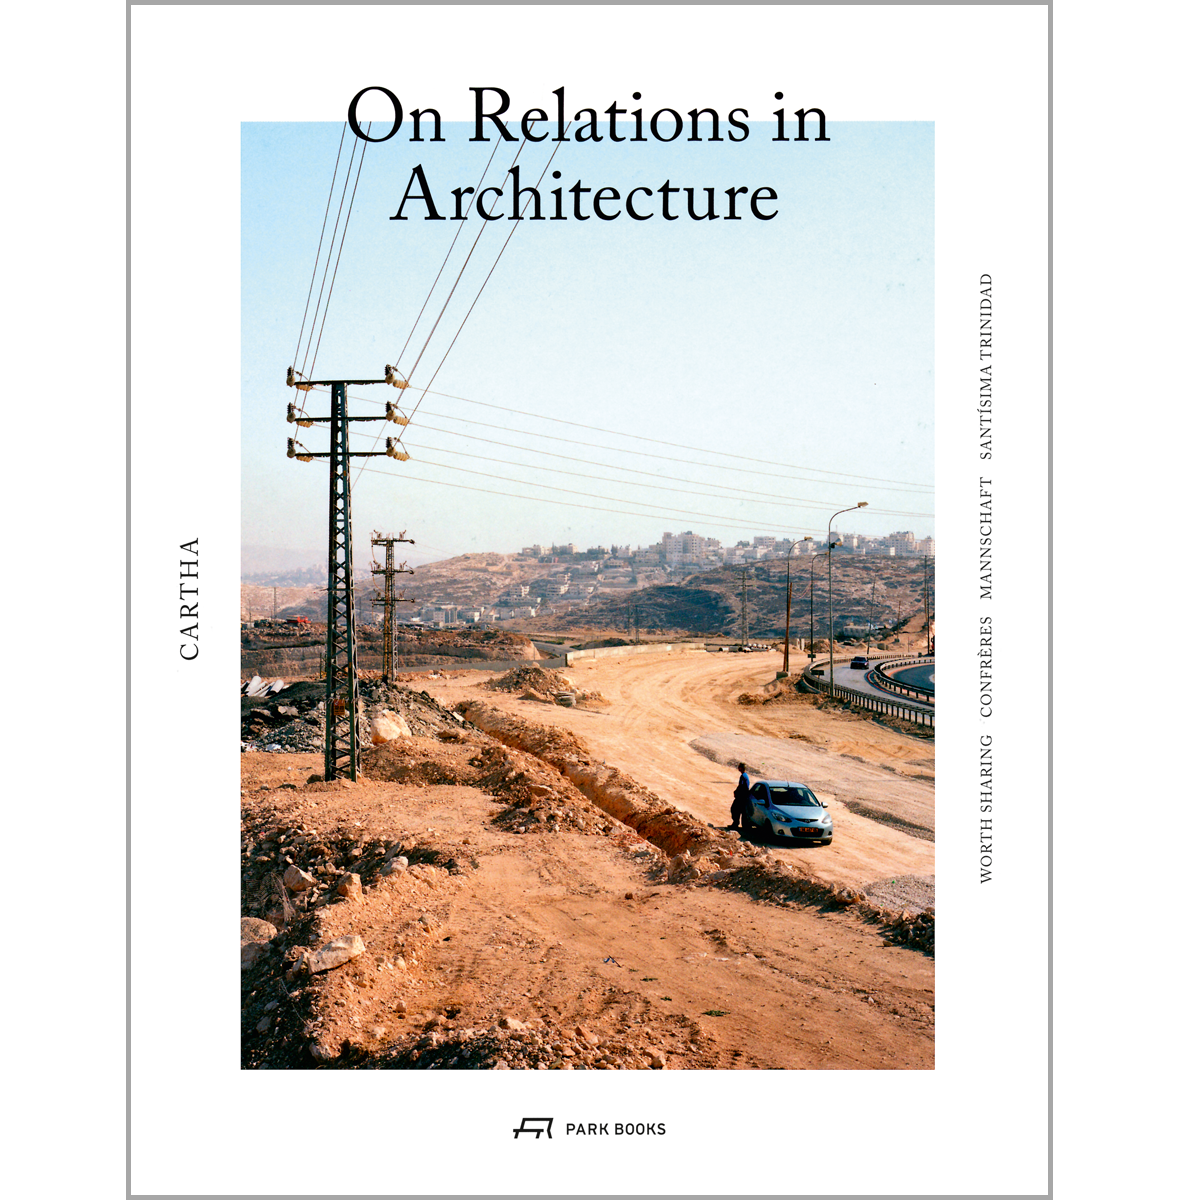 On Relations in Architecture